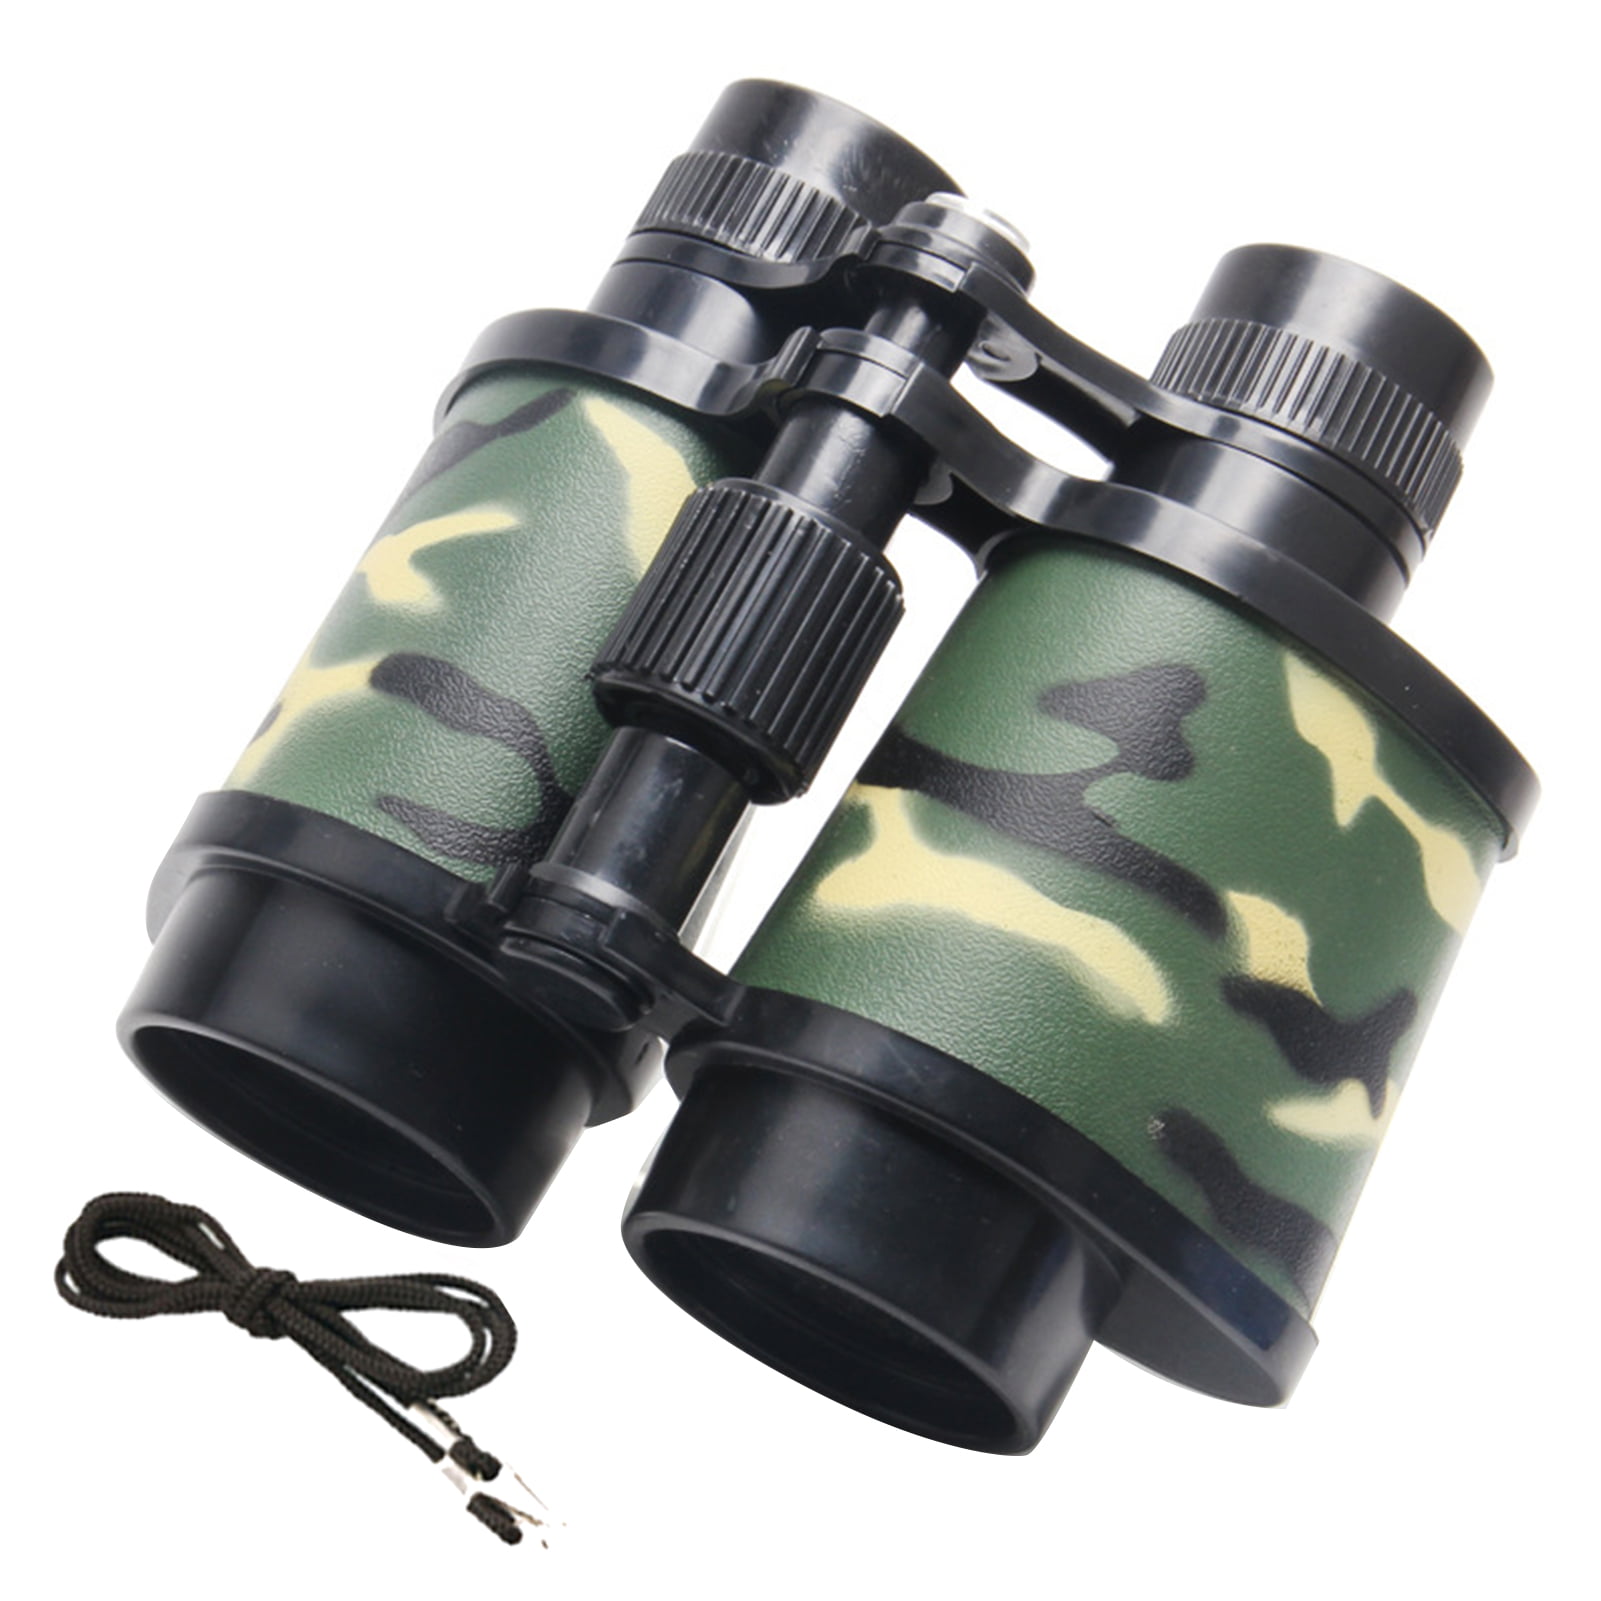 Army Camo Binoculars For Kids Child Toy Camouflage Play Outdoor Learning Game T 